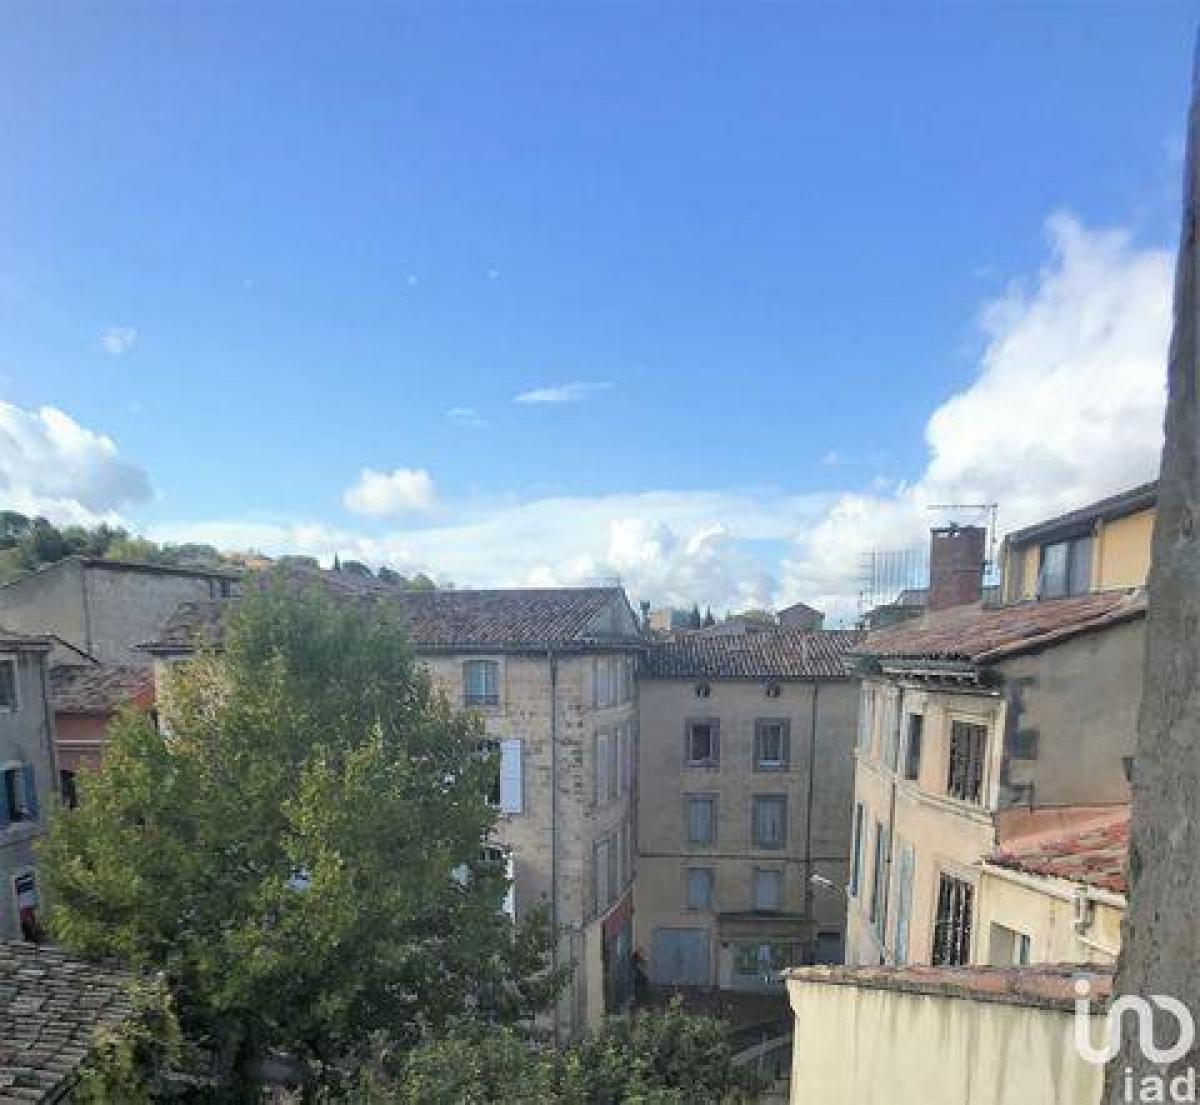 Picture of Retail For Sale in Apt, Provence-Alpes-Cote d'Azur, France